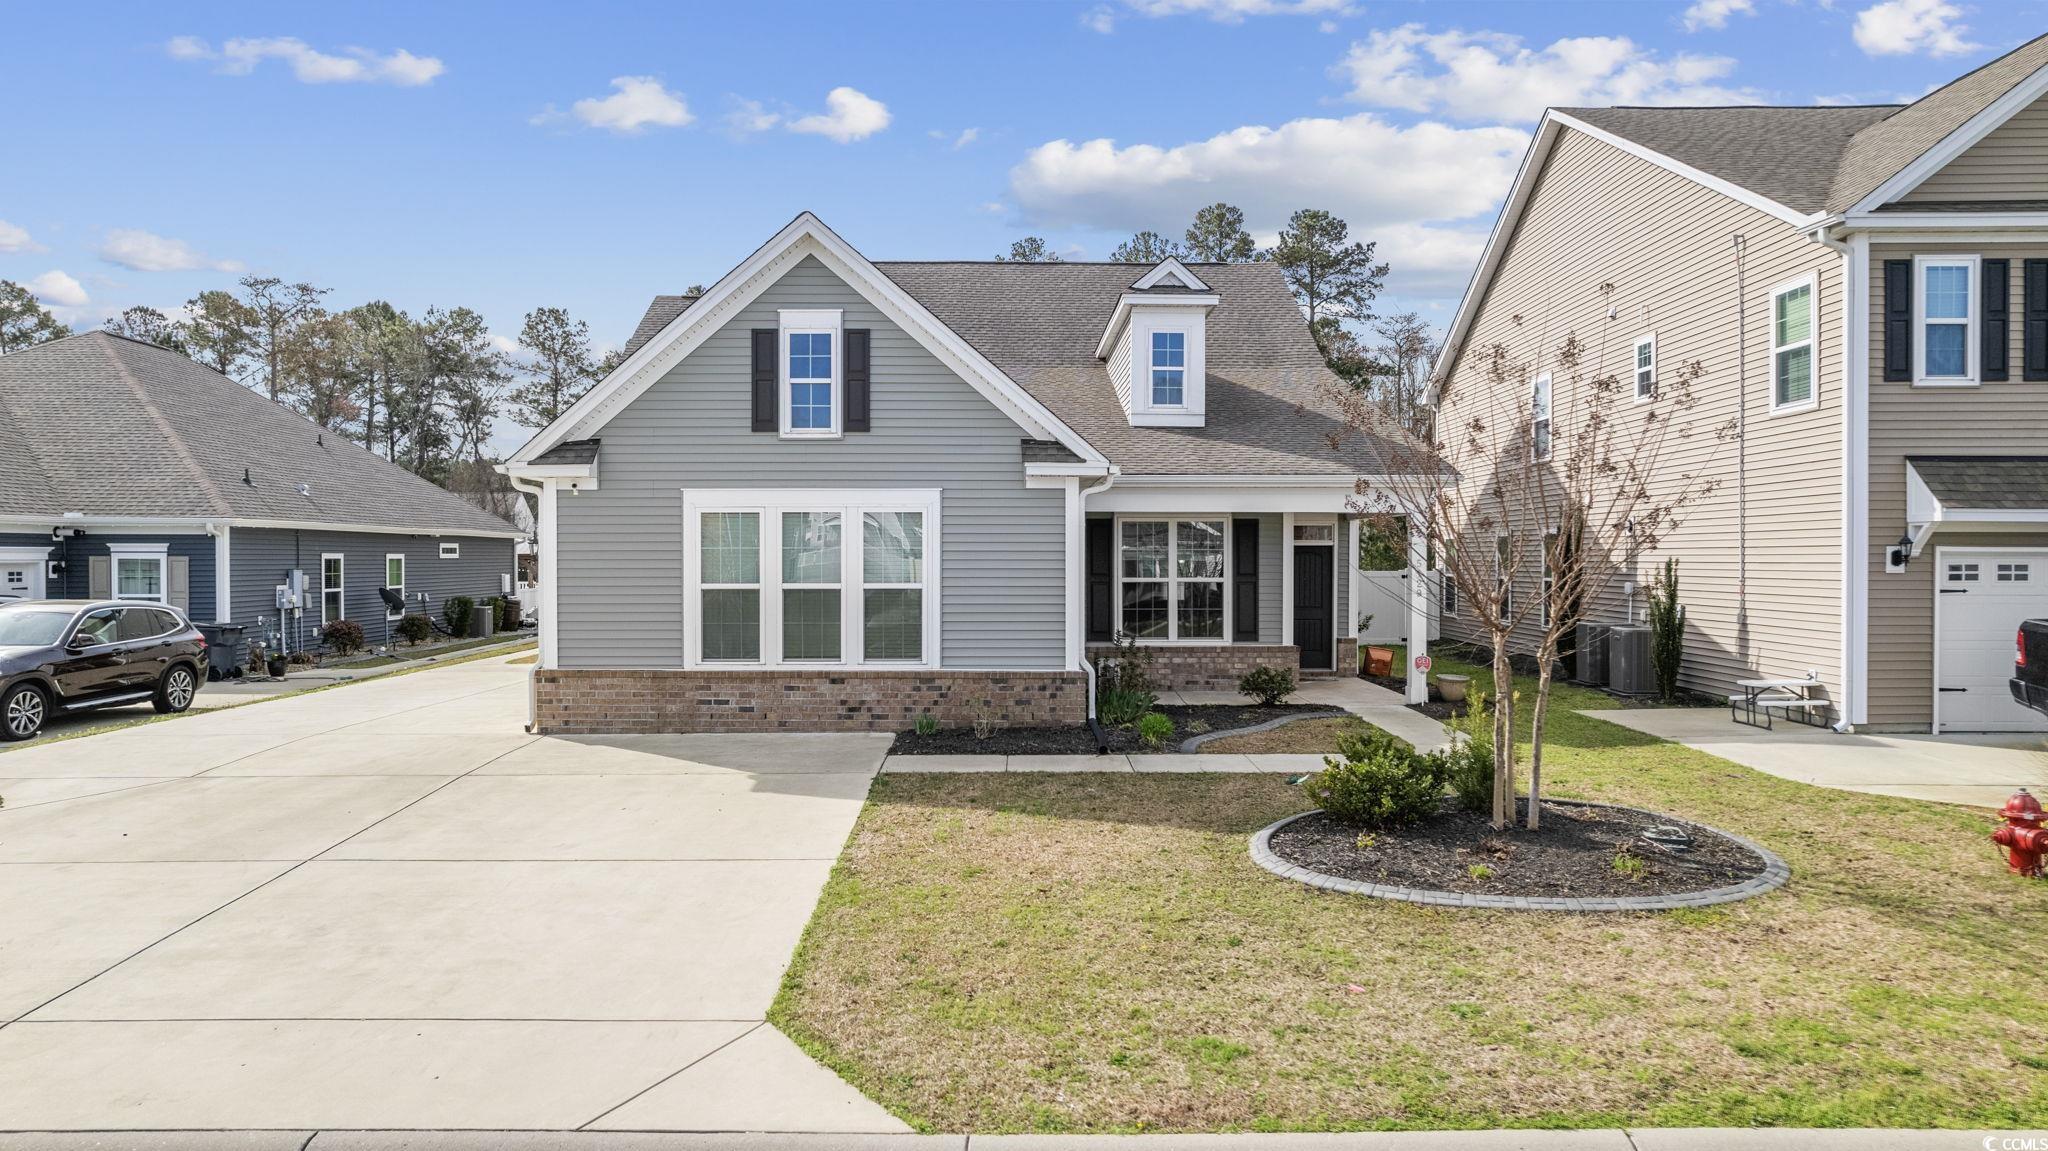 5129 Country Pine Dr. Myrtle Beach, SC 29579